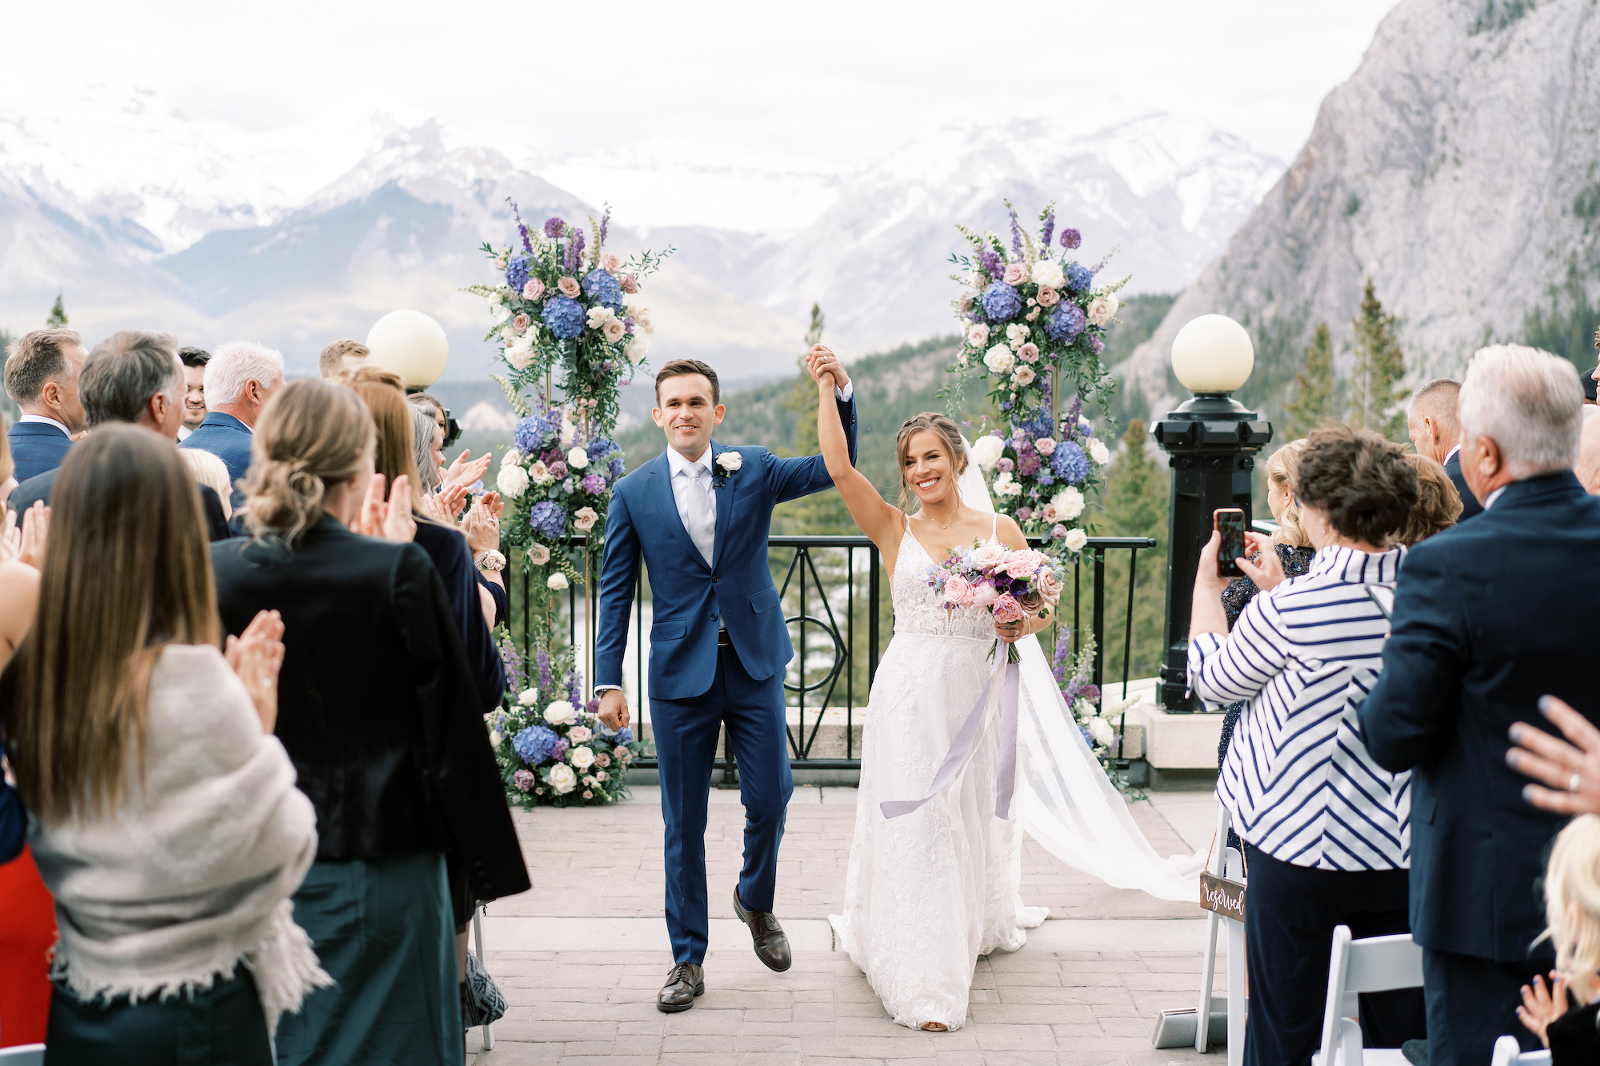 Newlywed recessional at Banff Springs wedding ceremony with blue purple pink flowers decor